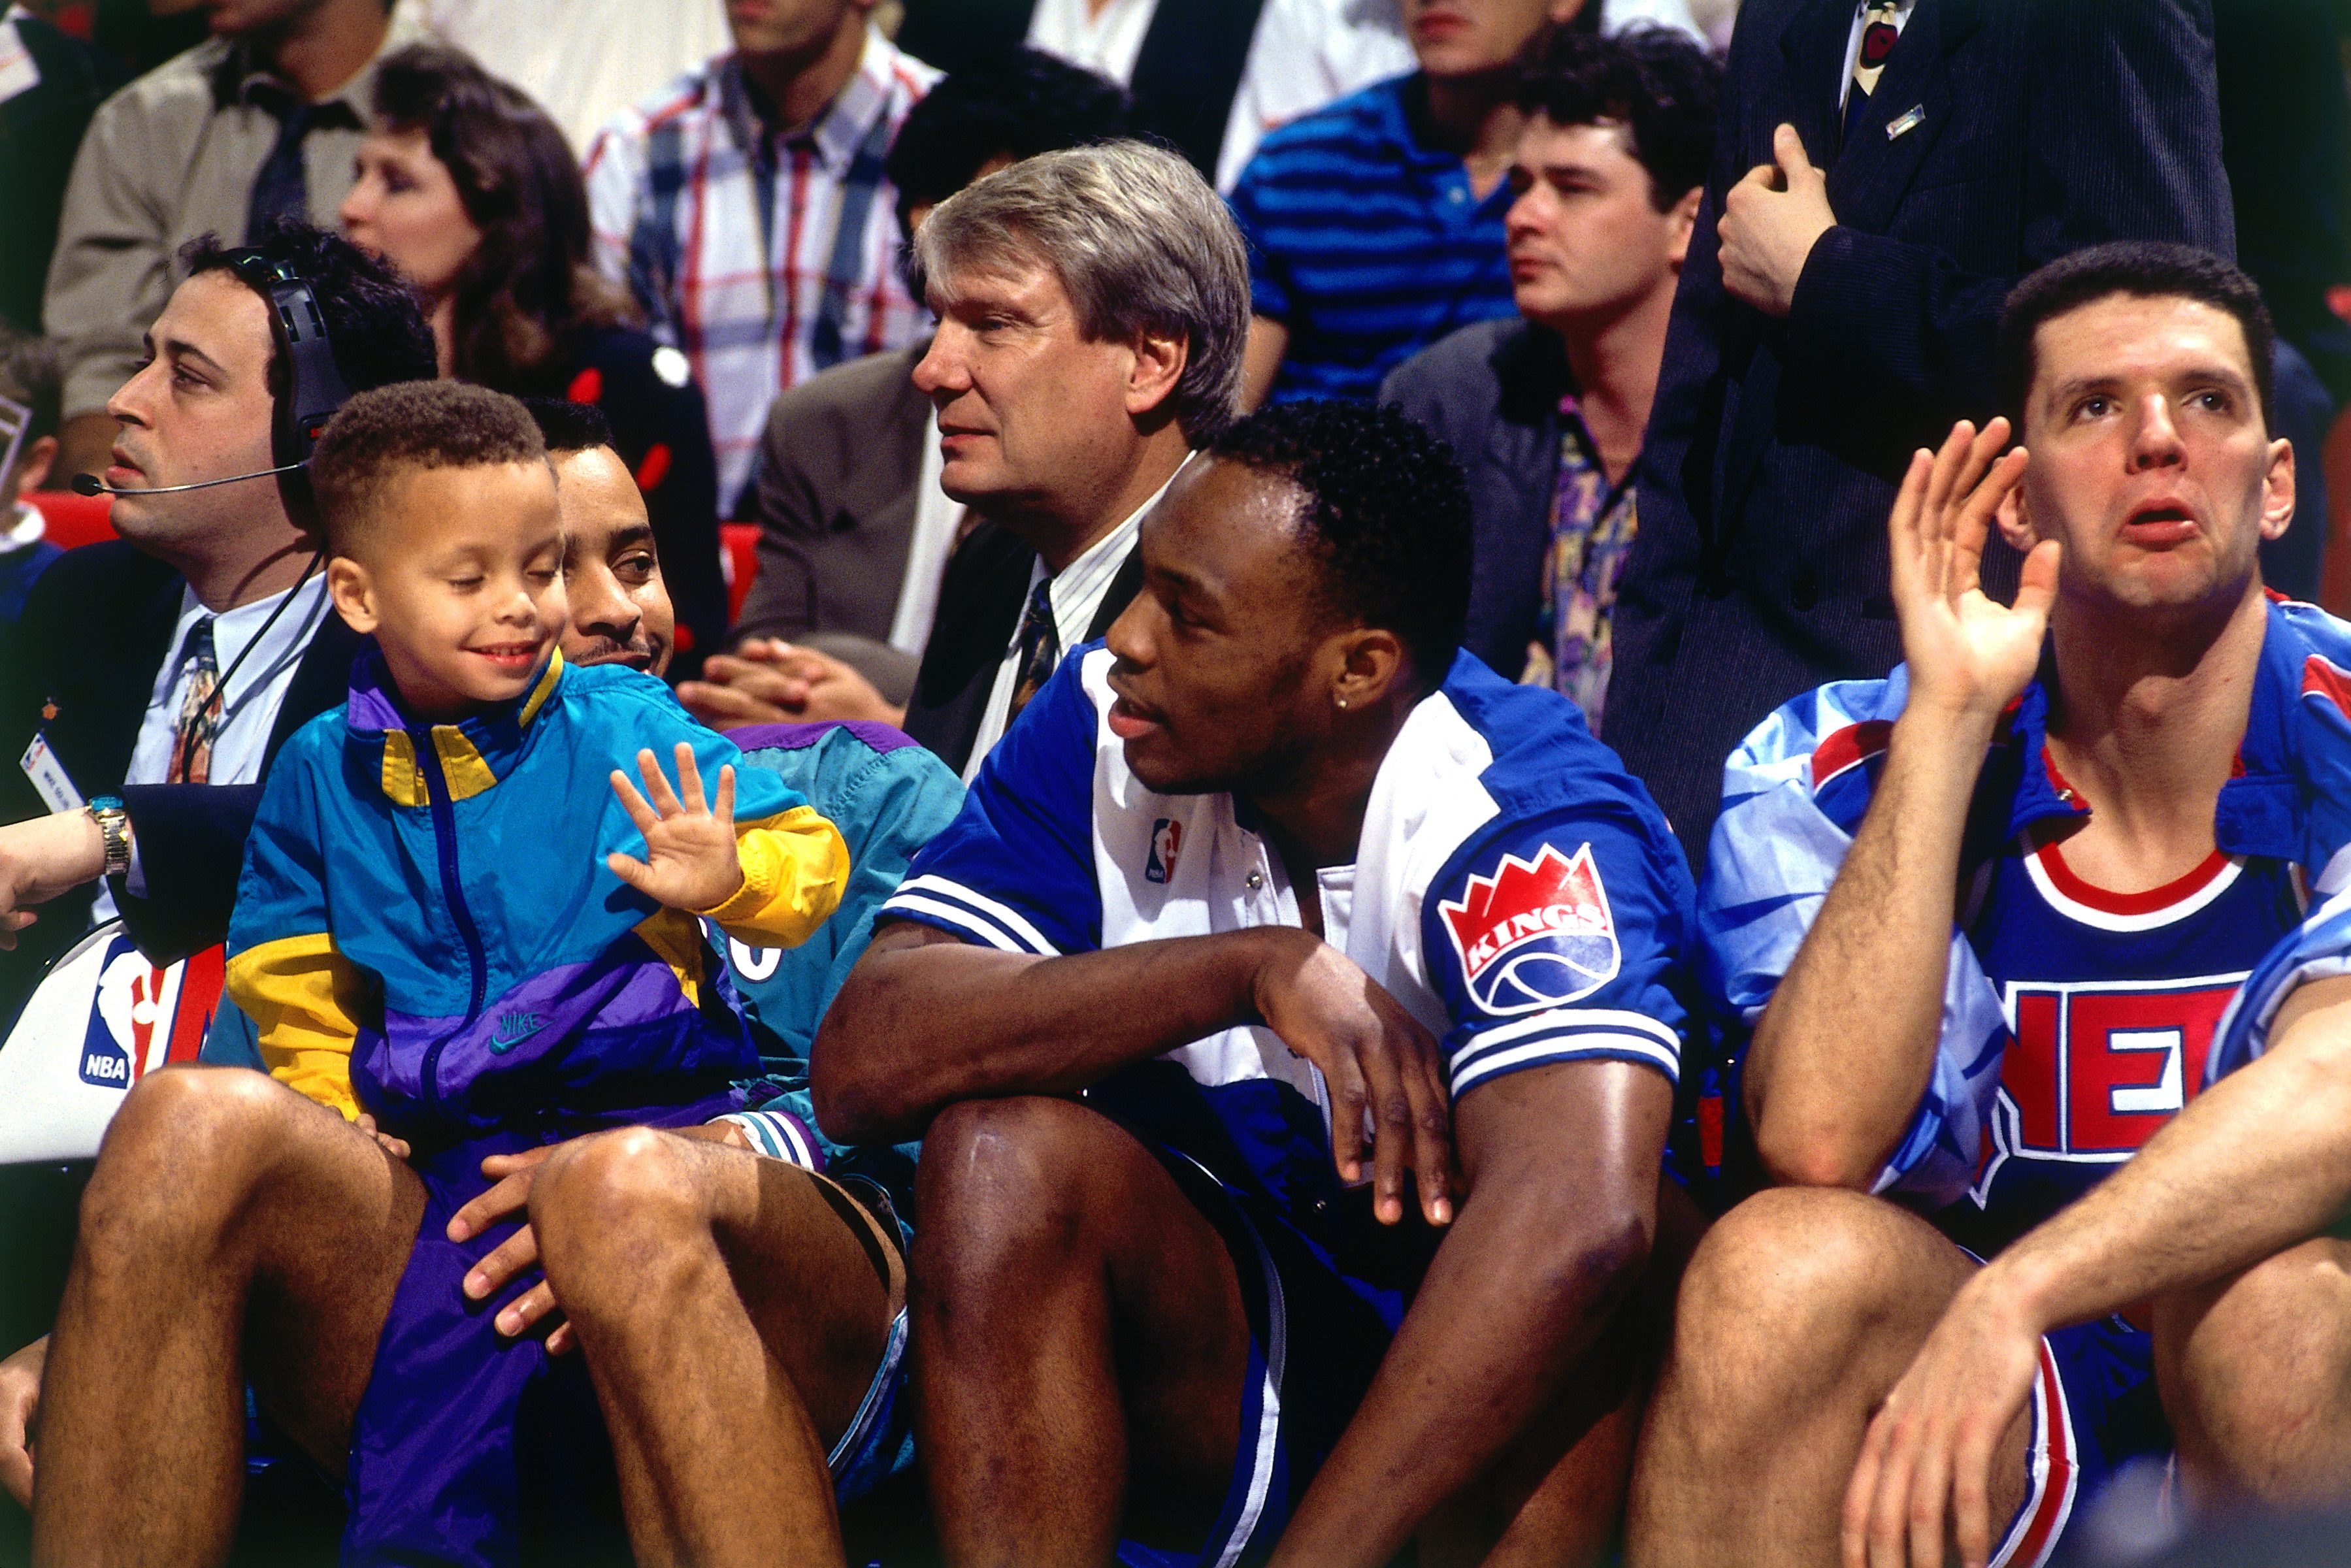 ORLANDO - FEBRUARY 8: (L) Dell Curry #30 of the Charlotte Hornets and his son Stephen Curry sit with Mitch Richmond #2 of the Sacramento Kings and Drazen Petrovic #3 of the New Jersey Nets during the 1992 NBA Three Point Competition on February 8, 1992 at the Orlando Arena in Orlando, Florida. NOTE TO USER: User expressly acknowledges that, by downloading and or using this photograph, User is consenting to the terms and conditions of the Getty Images License agreement. Mandatory Copyright Notice: Copyright 1992 NBAE (Photo by Andrew D. Bernstein/NBAE via Getty Images)